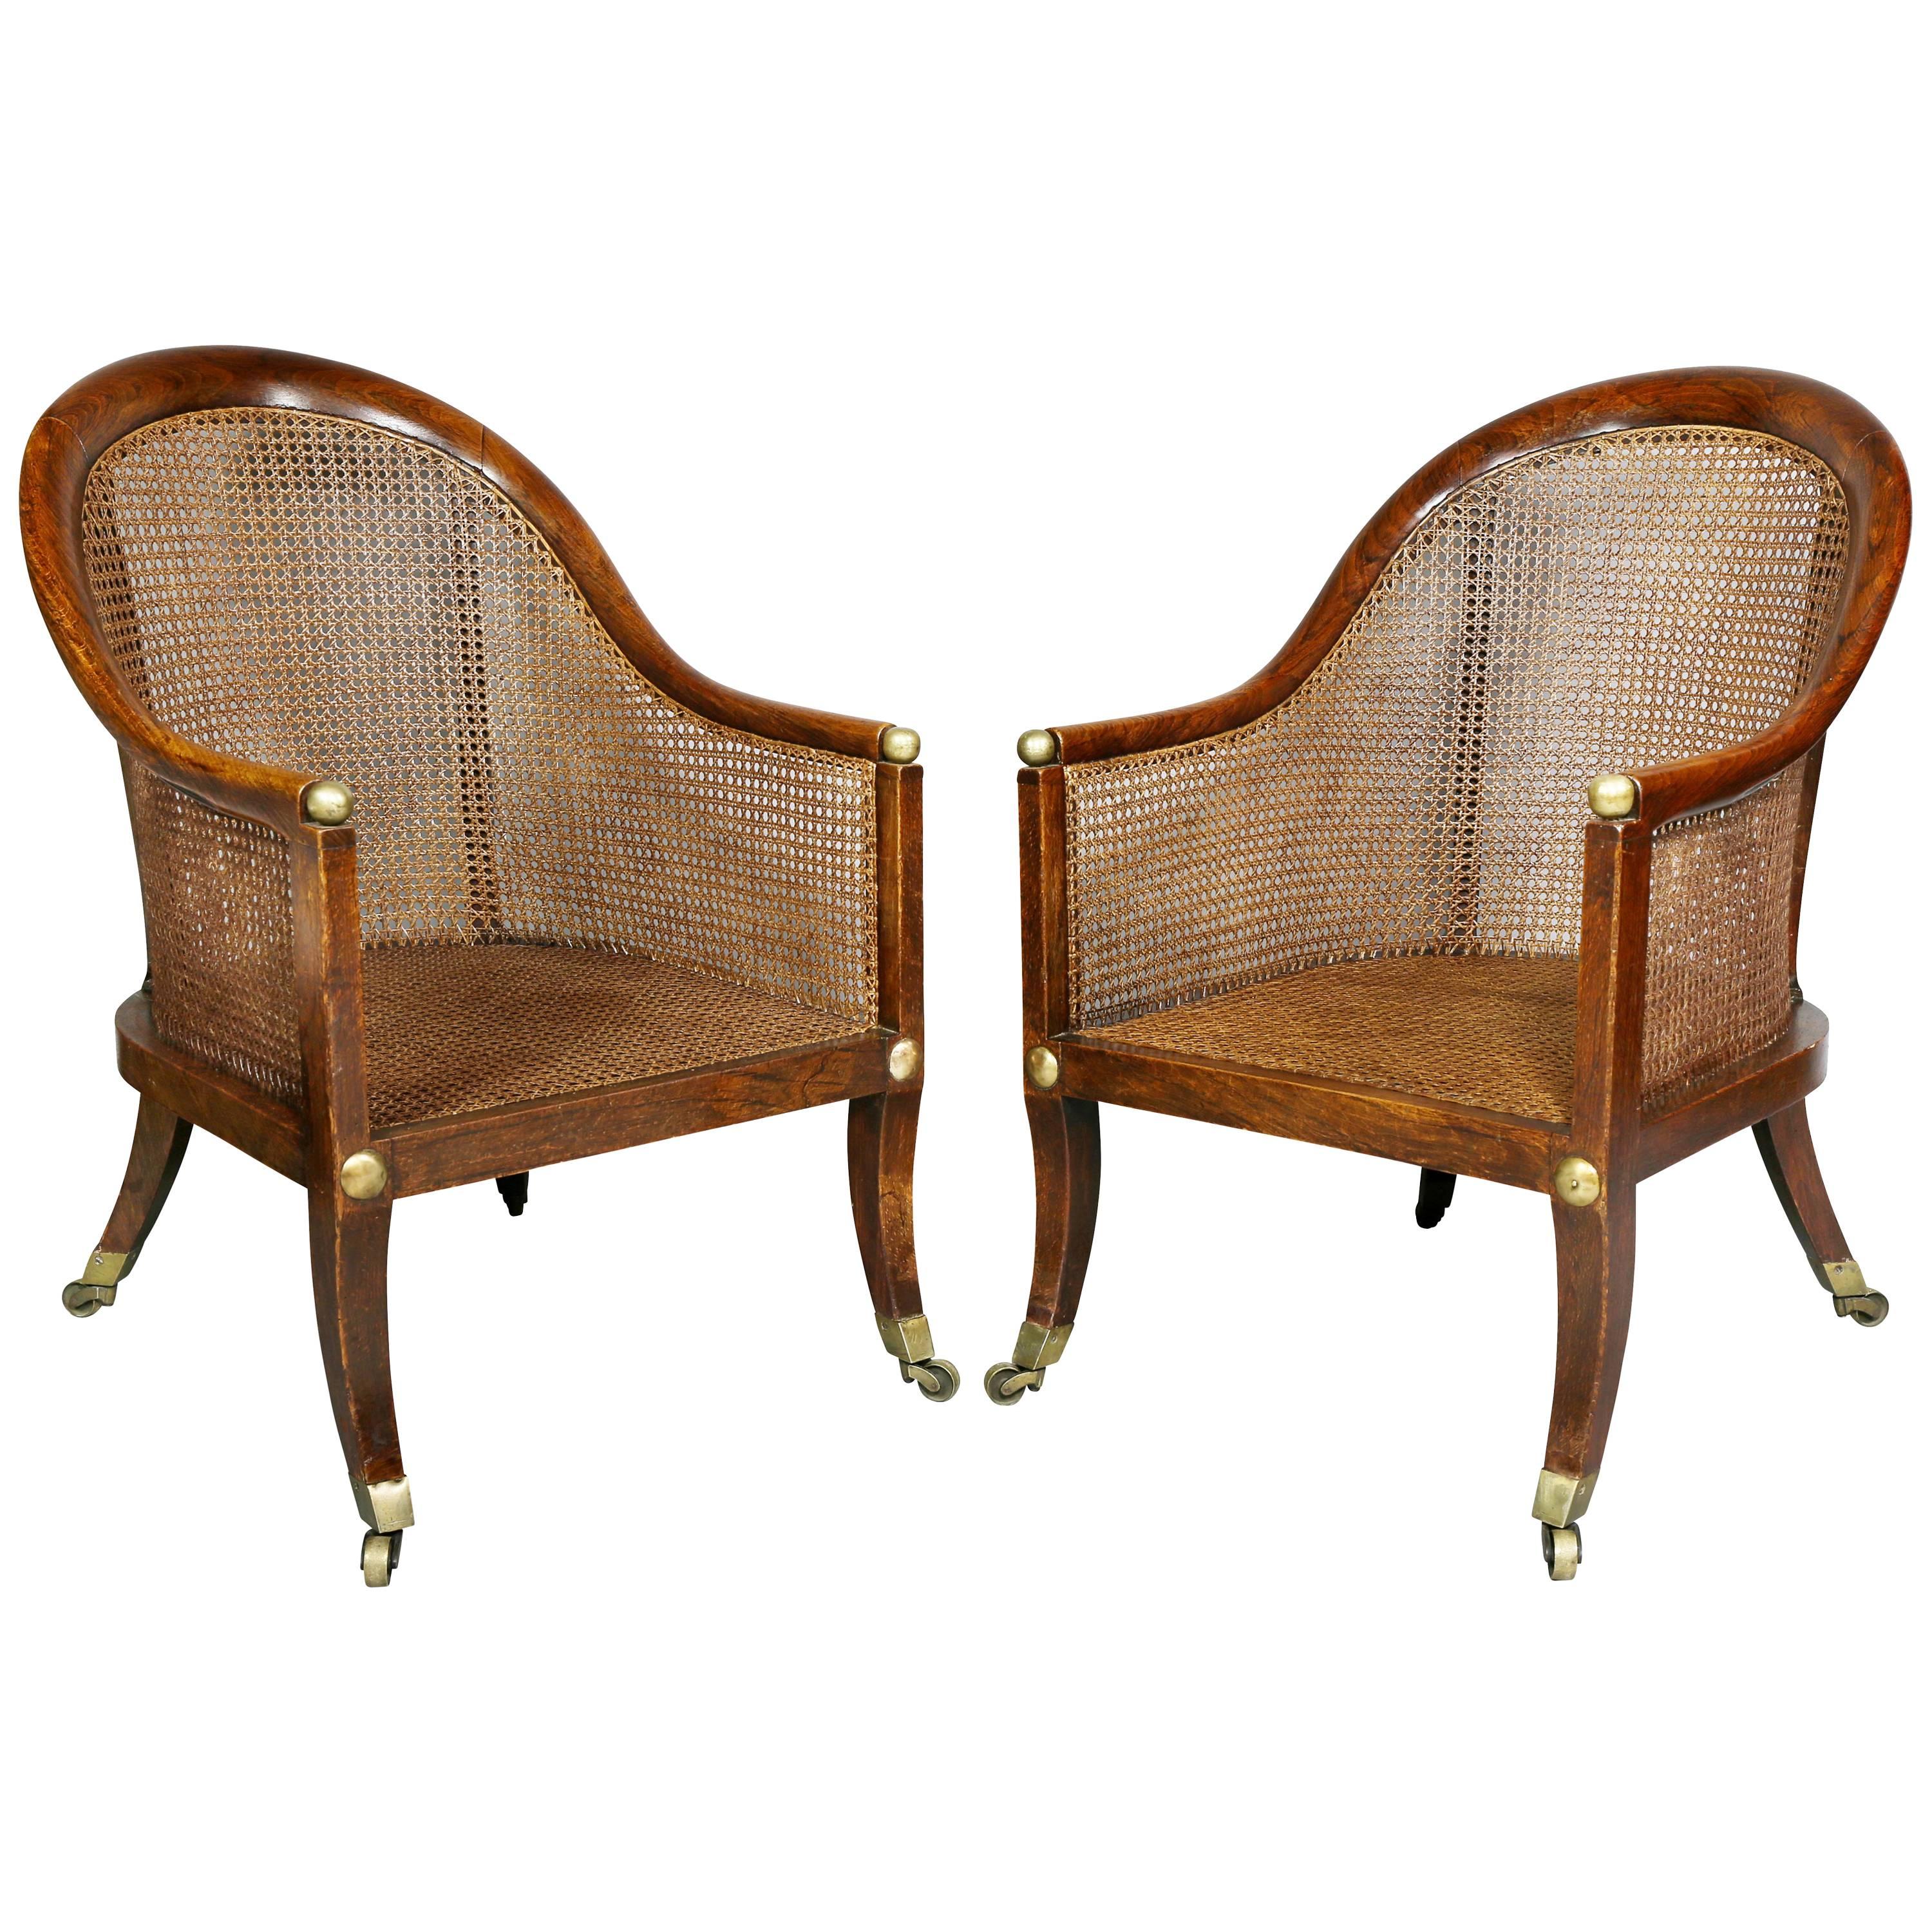 Pair of Regency Faux Rosewood Caned Tub Chairs